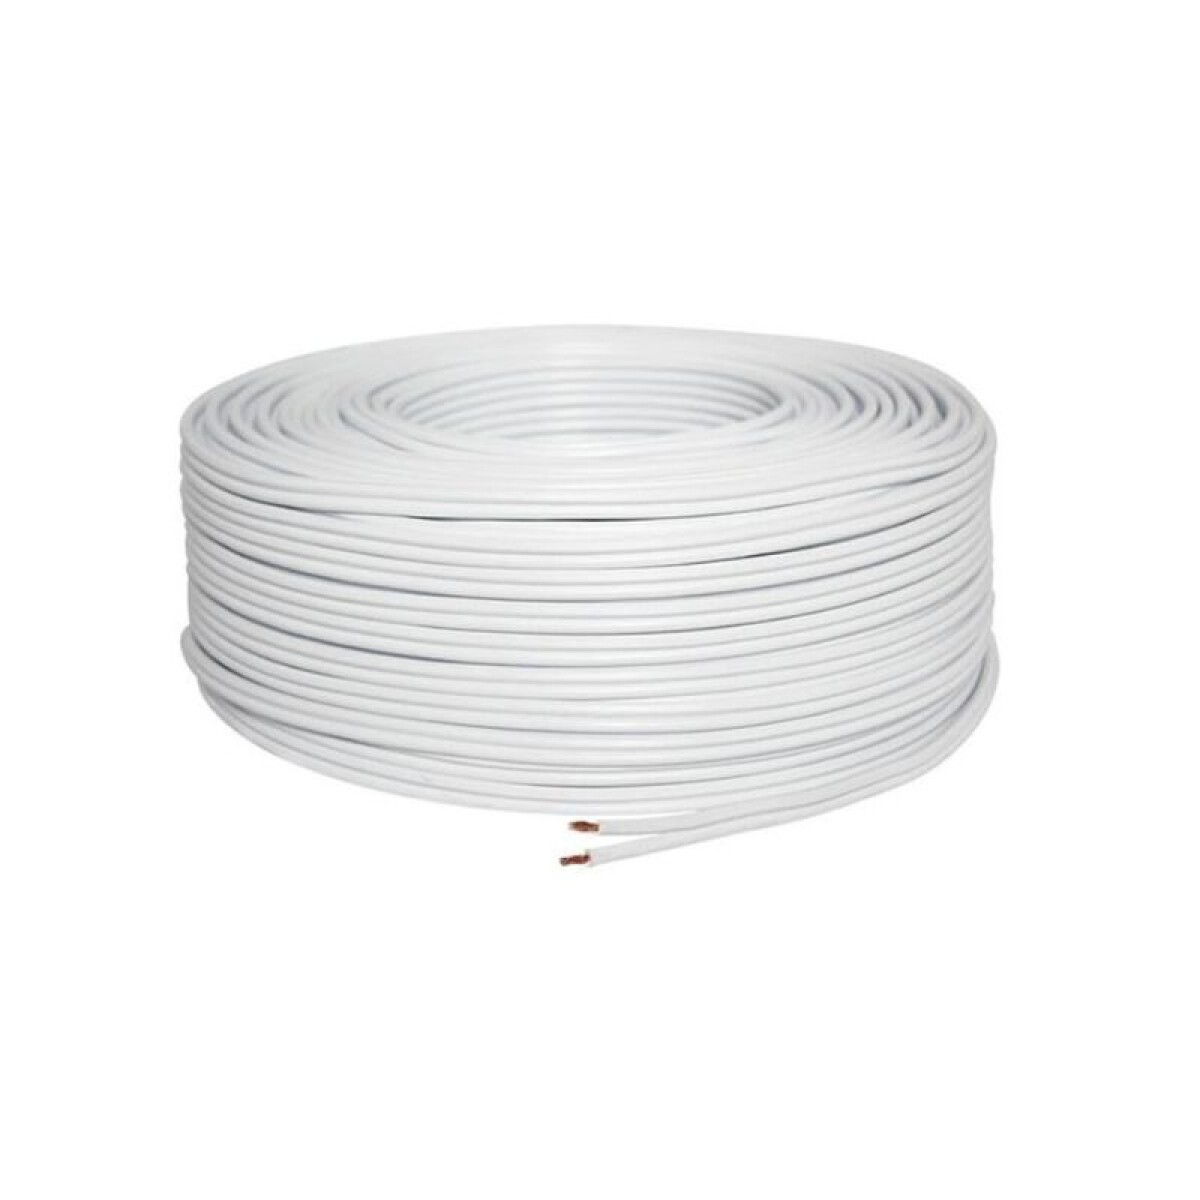 CABLE GEMELO 2 X 1 - 1 MT 